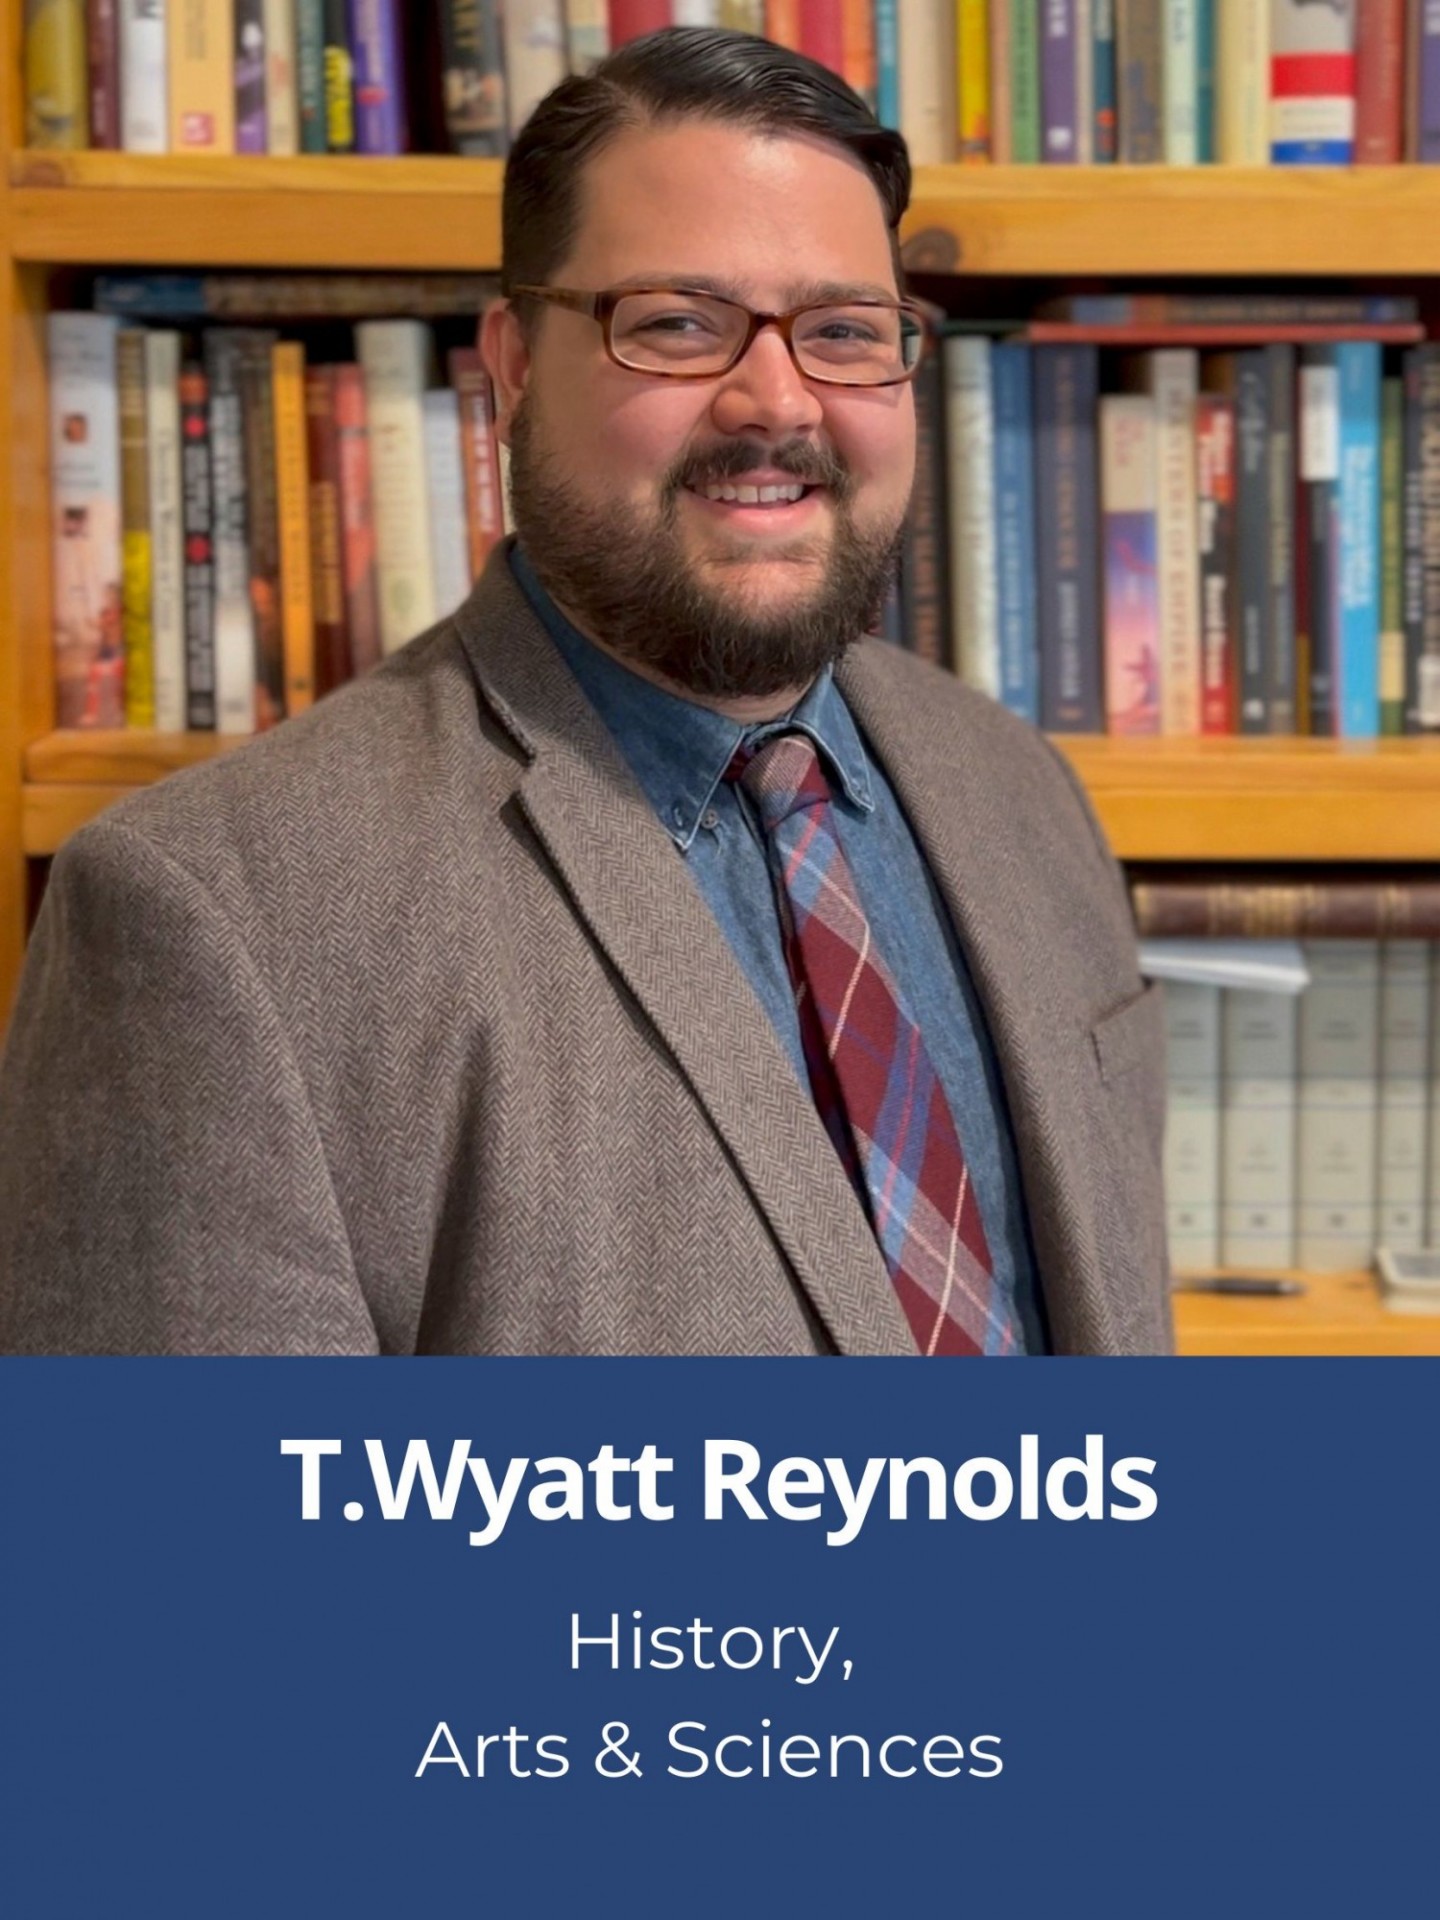 Headshot of T. Wyatt Reynolds with his name underneath